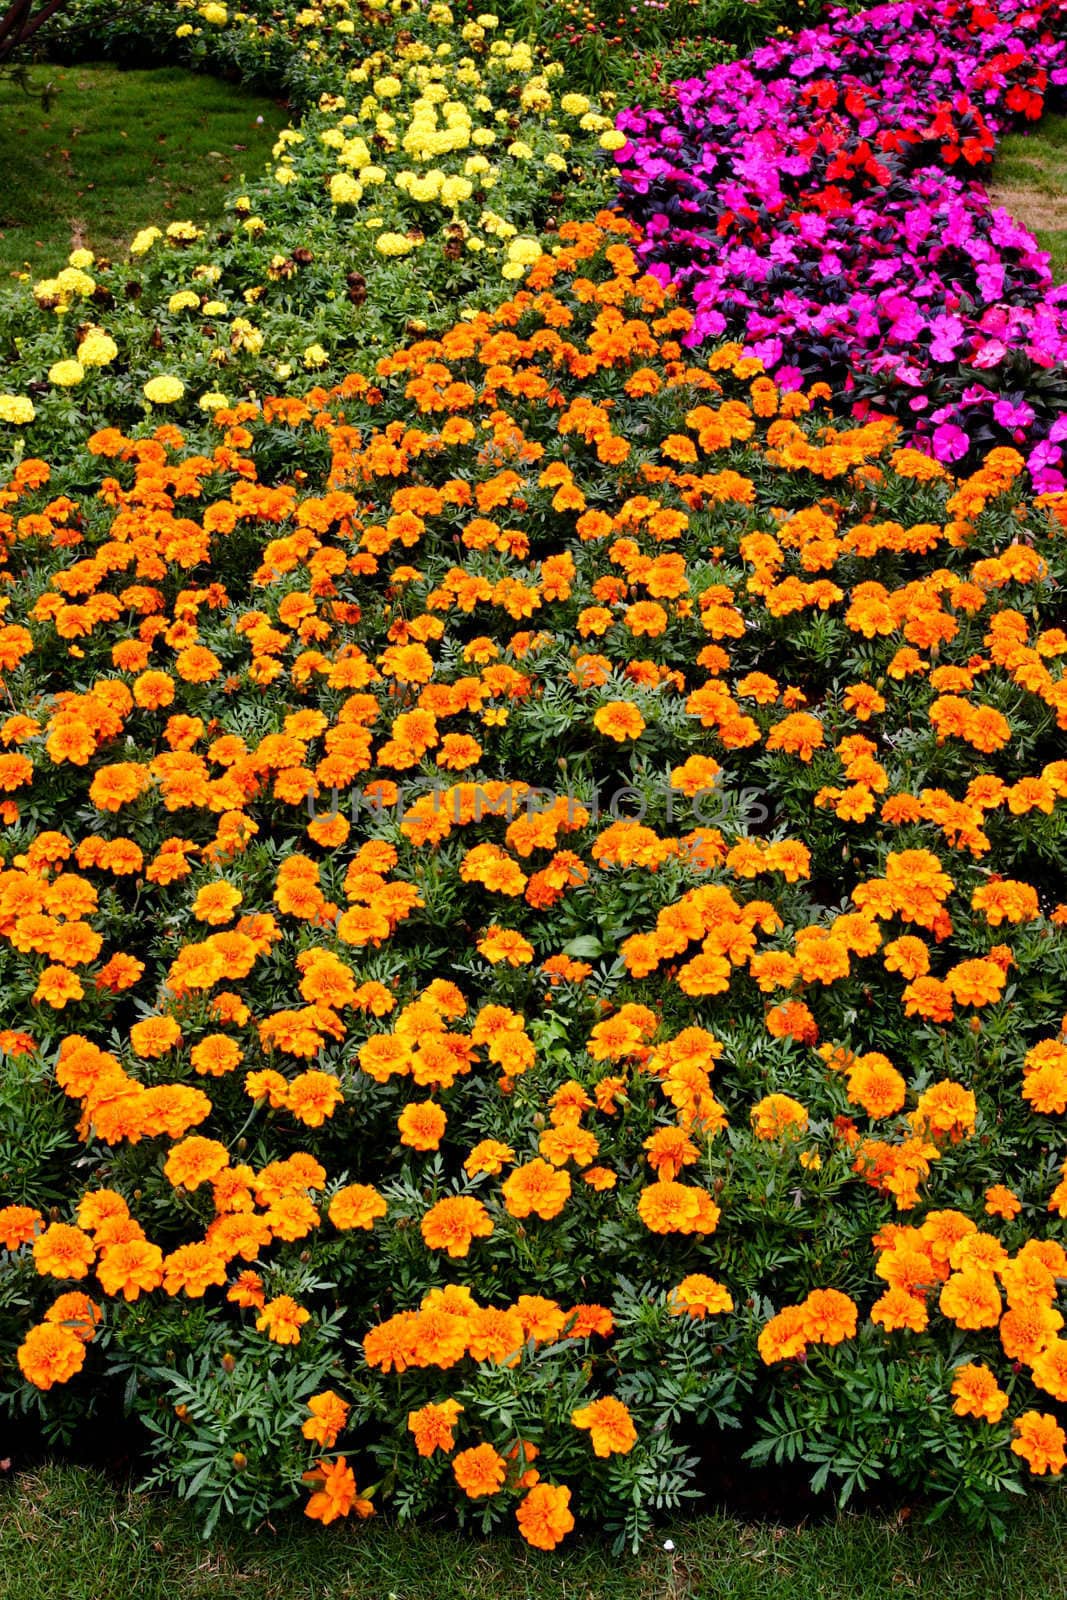 Flowerbed combine with different colors of flower